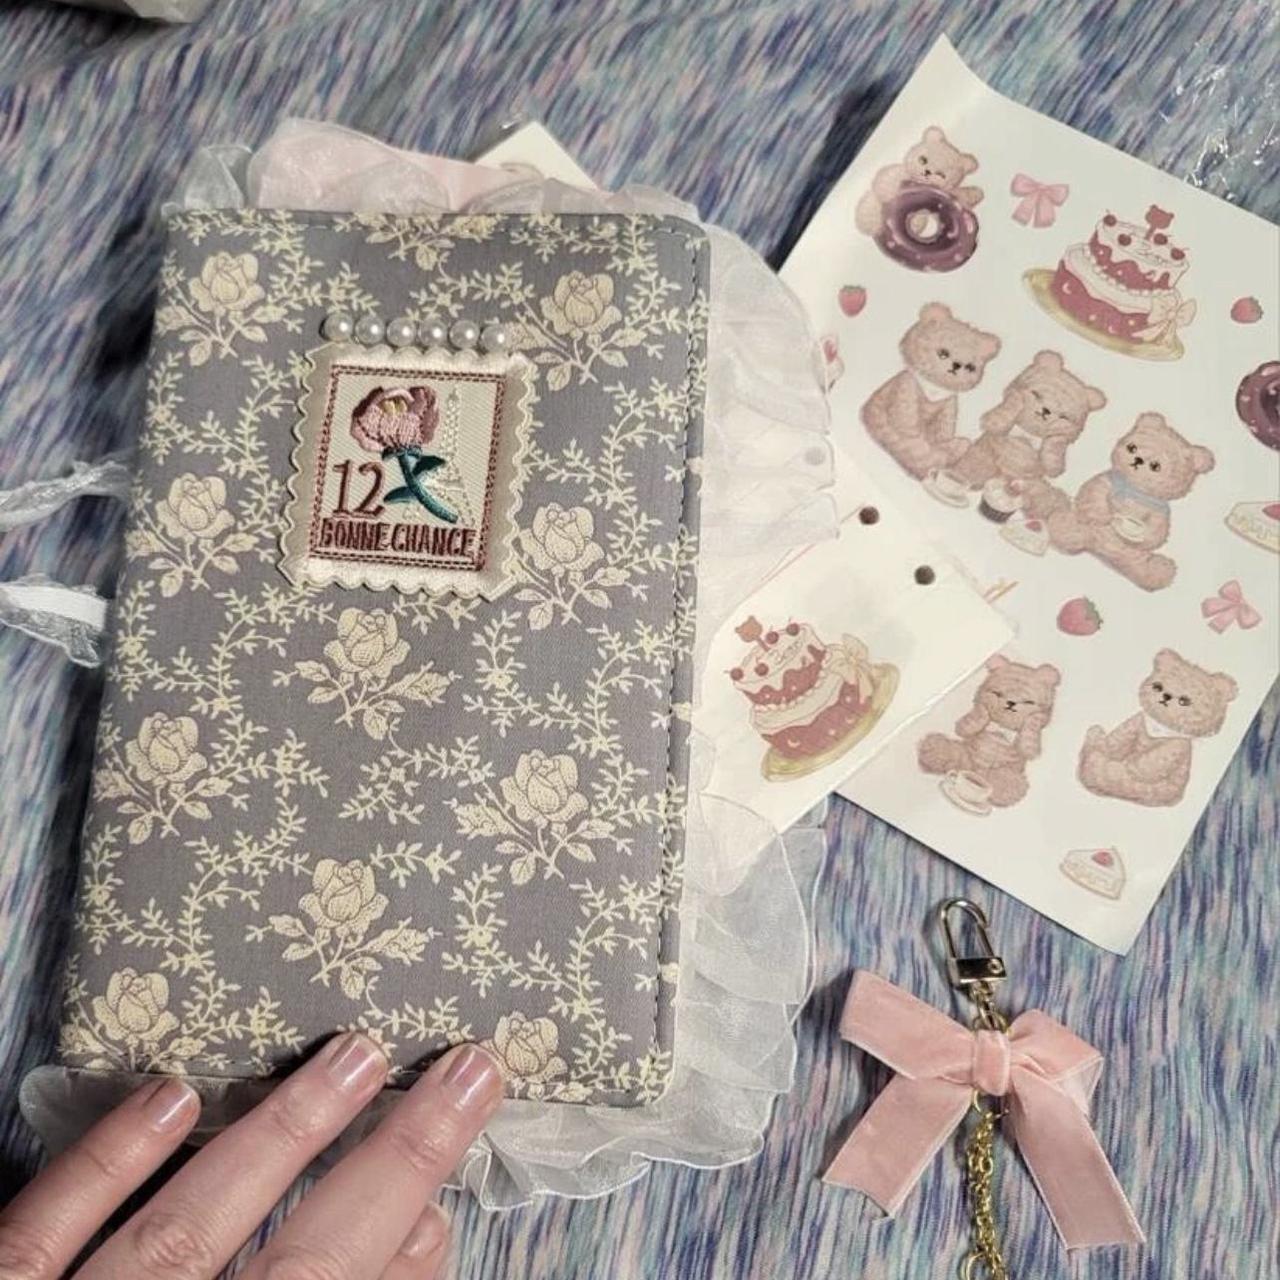 Journal inspo ˚₊‧꒰ა ♡ ໒꒱ ‧₊˚ 🍥follow @coquettevibes for more coquette  content Coquette, coquette outfit, coquette aesthetic, coquette …, Coquette  Journal 